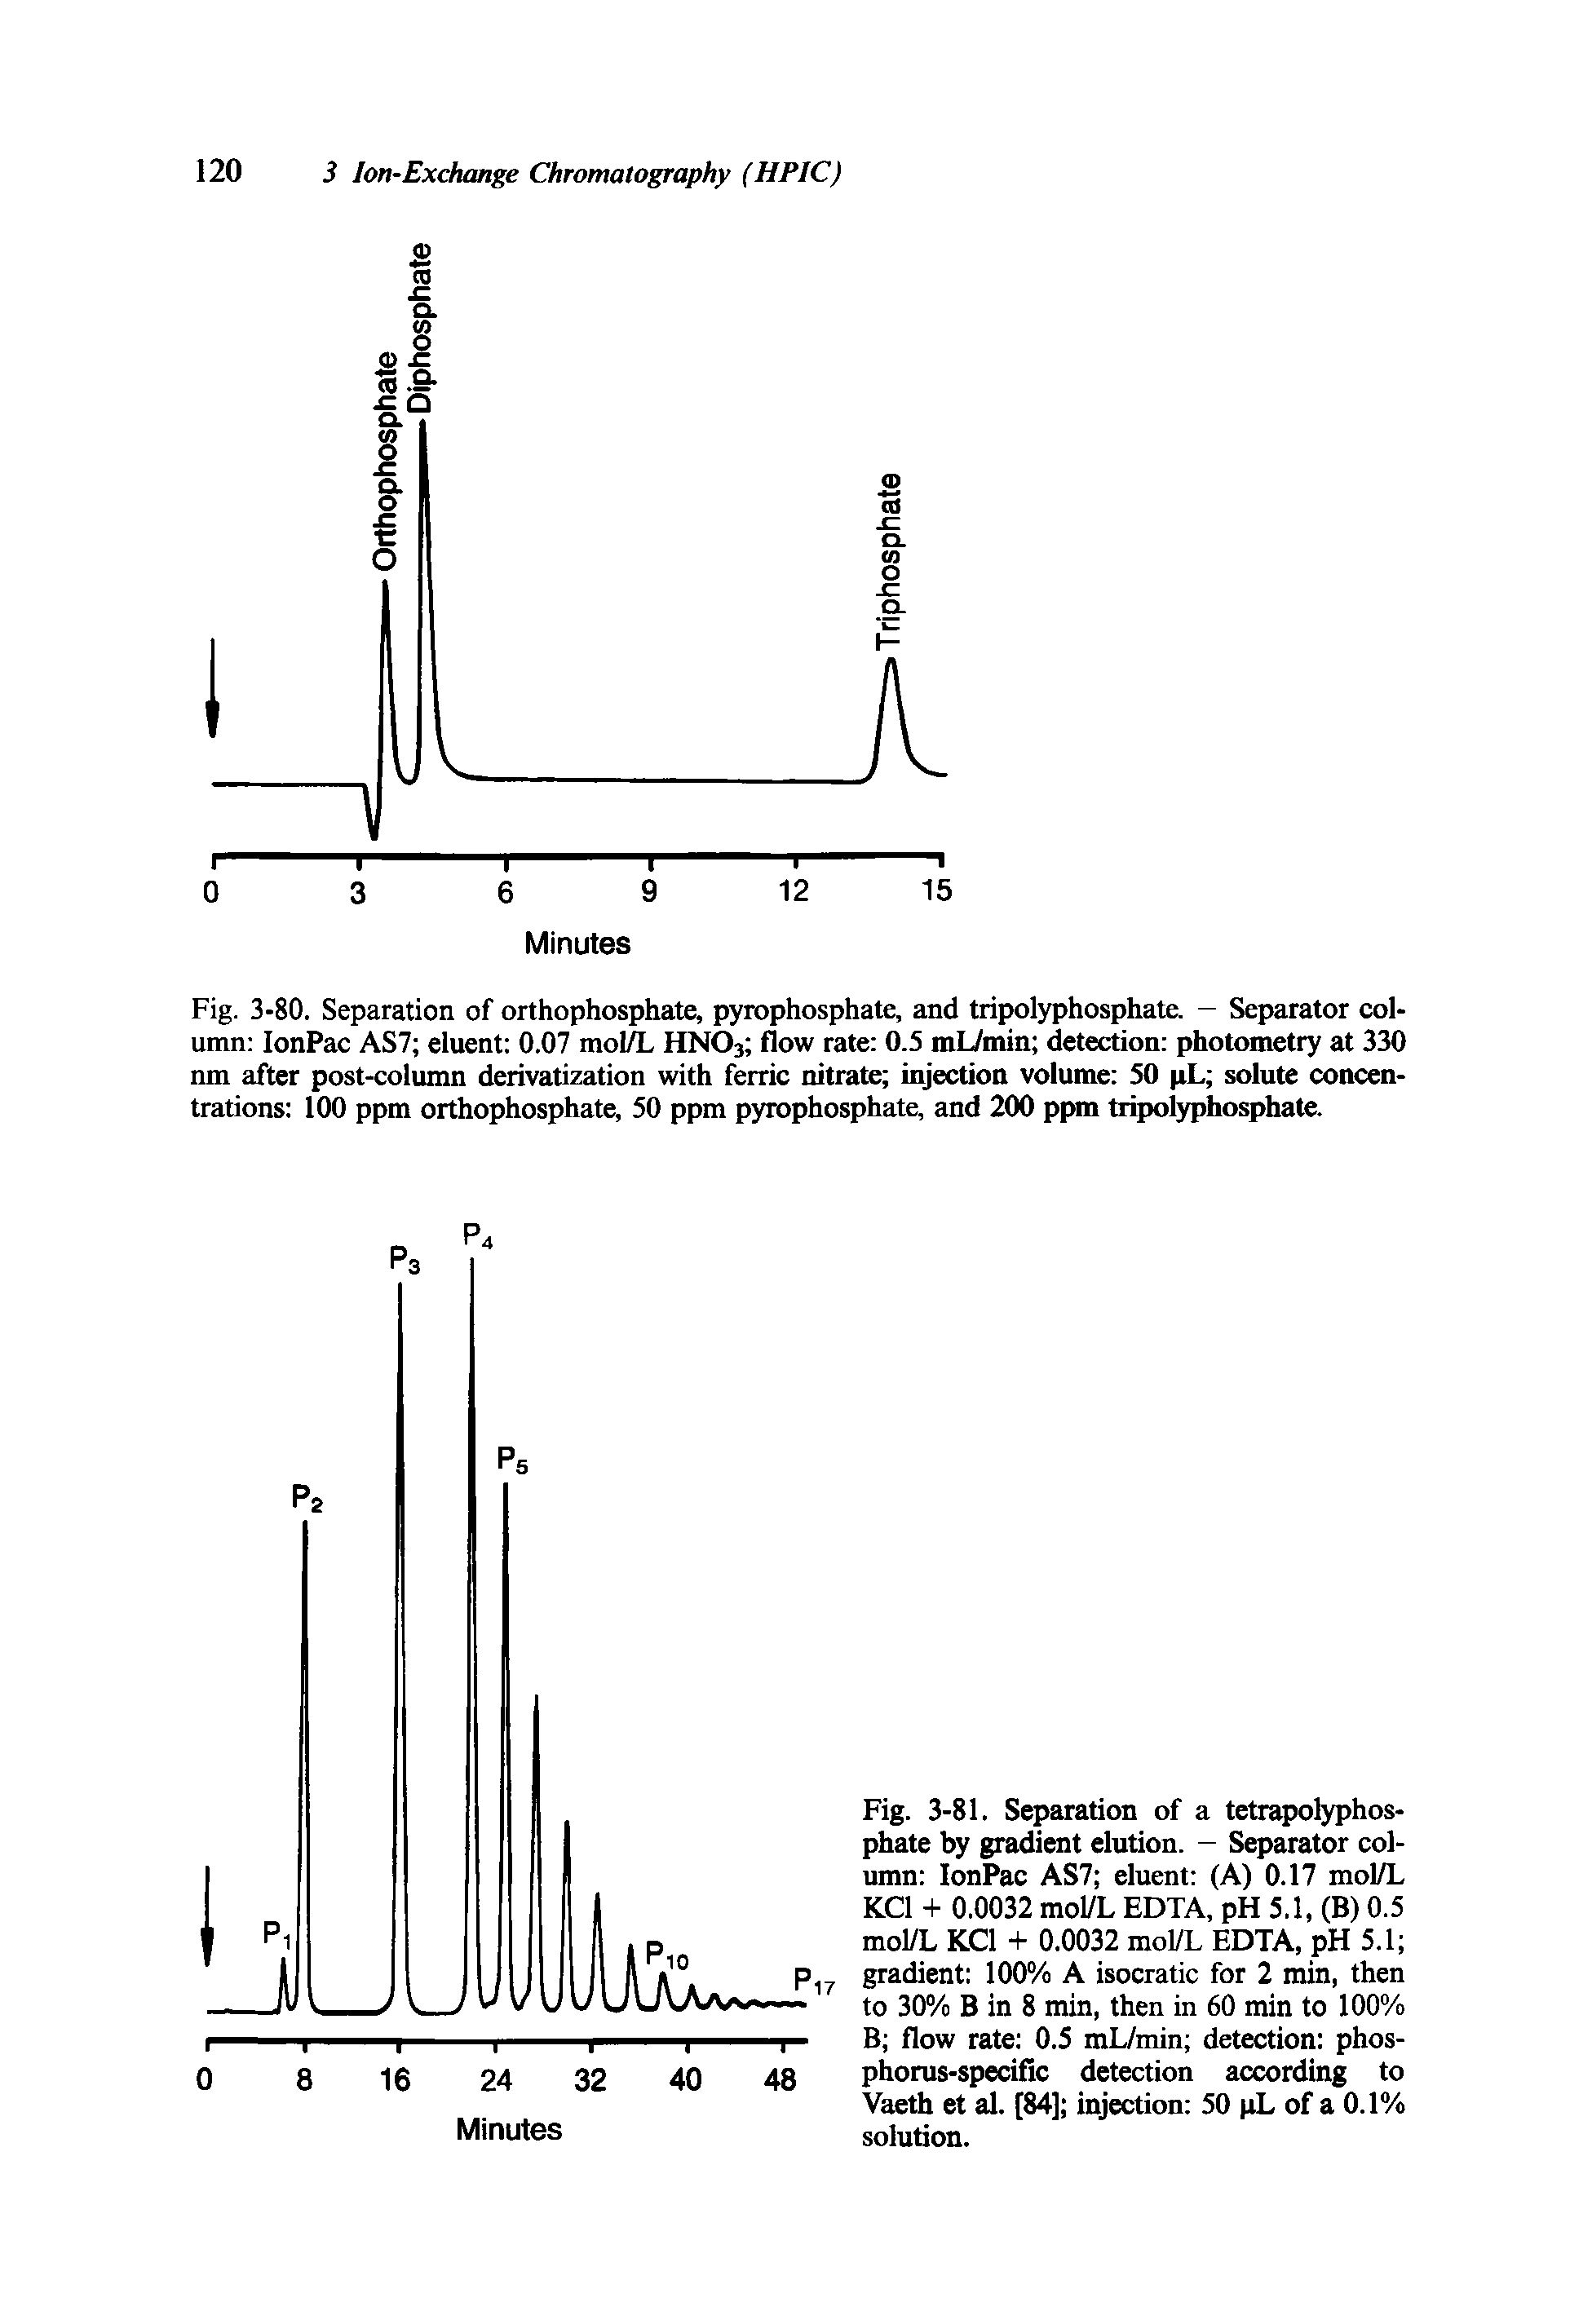 Fig. 3-80. Separation of orthophosphate, pyrophosphate, and tripolyphosphate. — Separator column IonPac AS7 eluent 0.07 mol/L HN03 flow rate 0.5 mL/min detection photometry at 330 nm after post-column derivatization with ferric nitrate injection volume 50 pL solute concentrations 100 ppm orthophosphate, 50 ppm pyrophosphate, and 200 ppm tripolyphosphate.